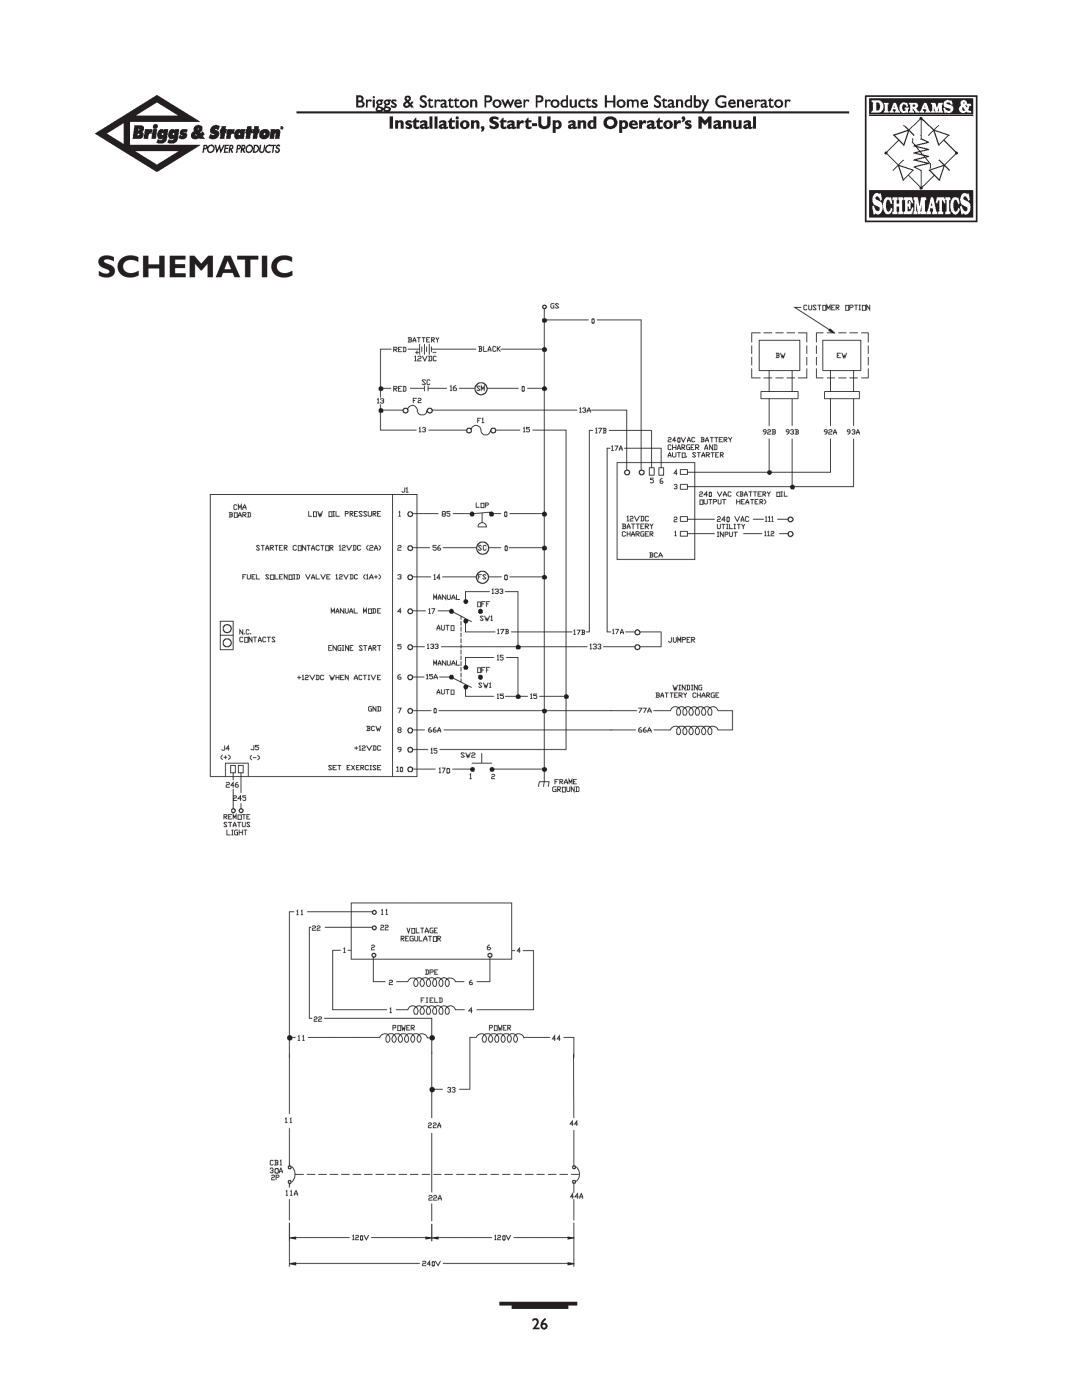 Briggs & Stratton 01897-0 manual Schematic, Installation, Start-Up and Operator’s Manual 